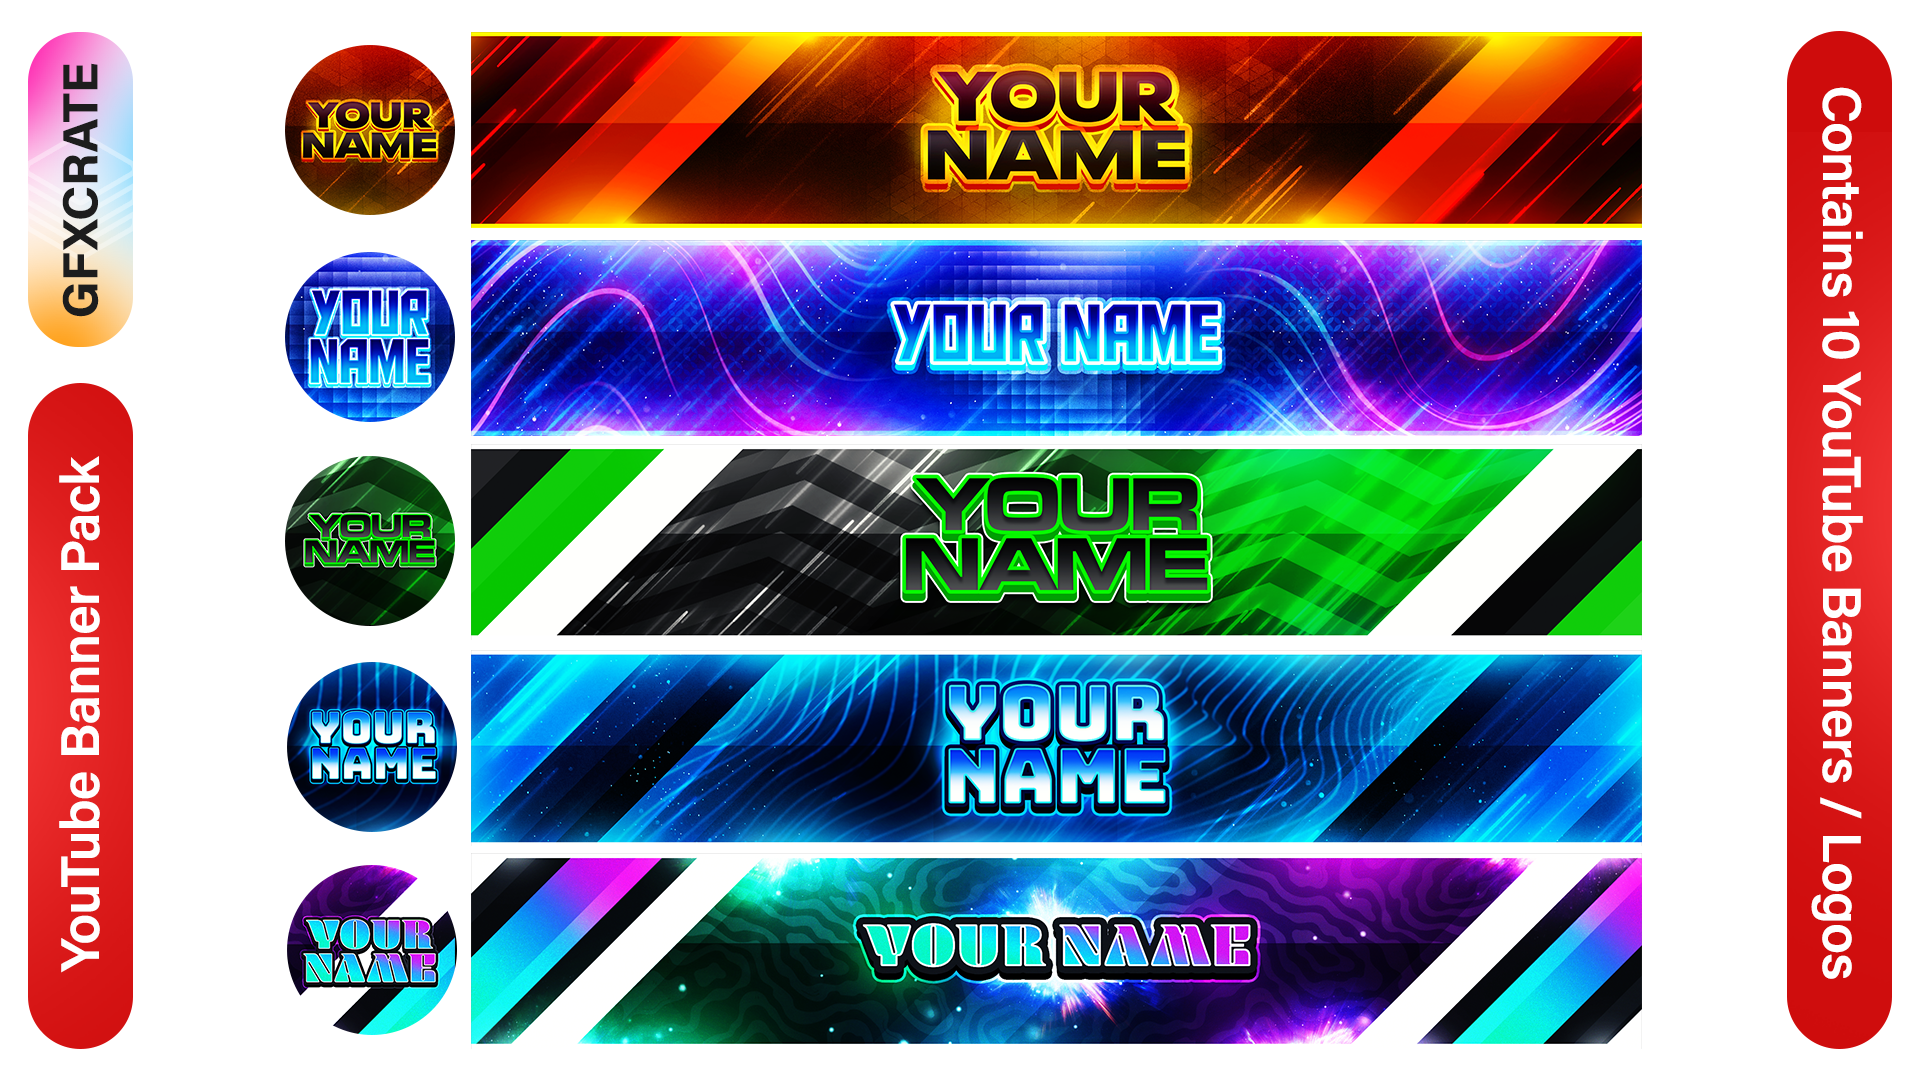 YouTube Fully Editable Banner and Logo Templates Pack 3